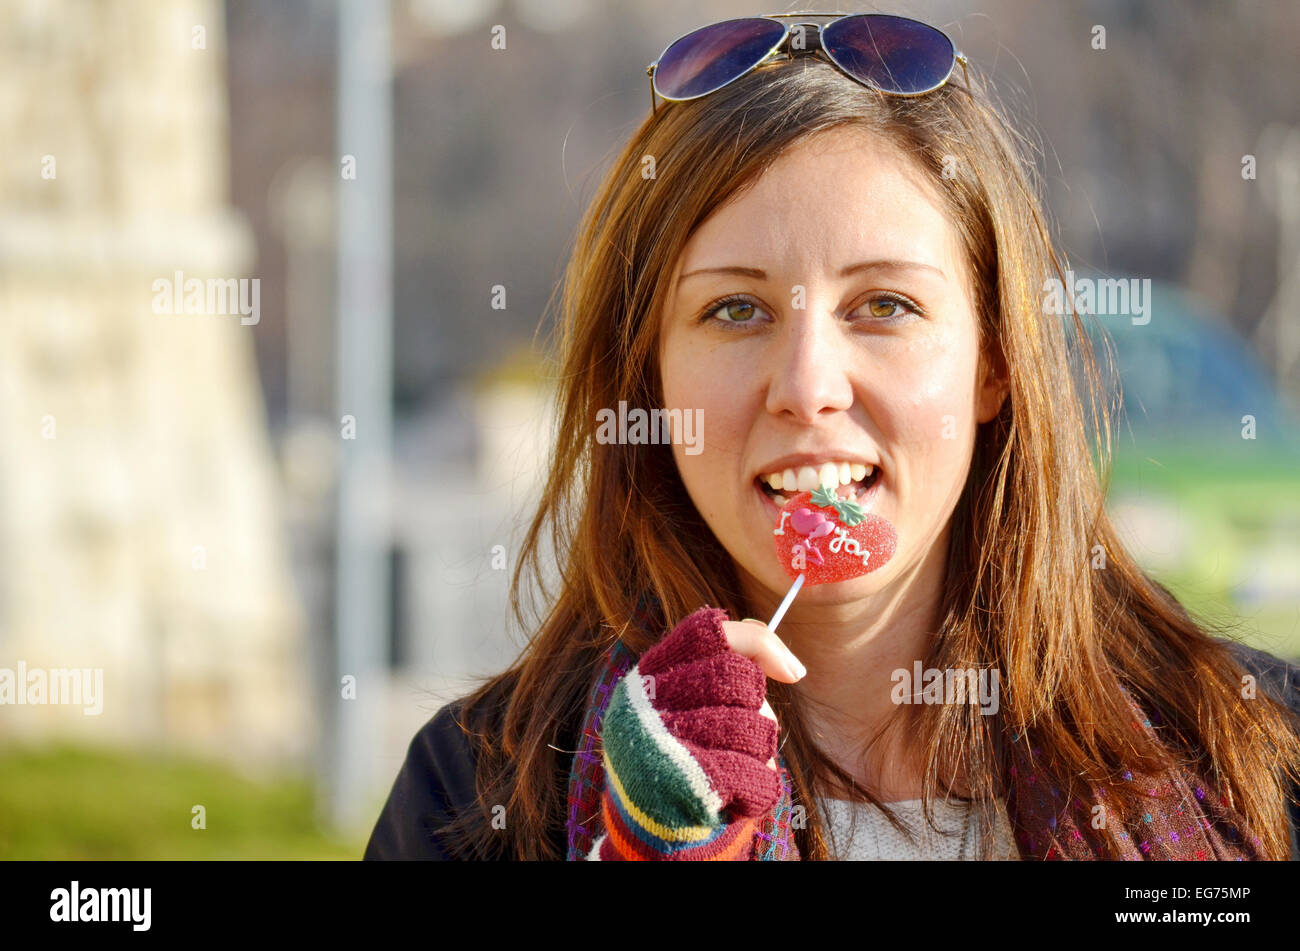 Girl biting heart shape candy on a sunny day outdoors Stock Photo